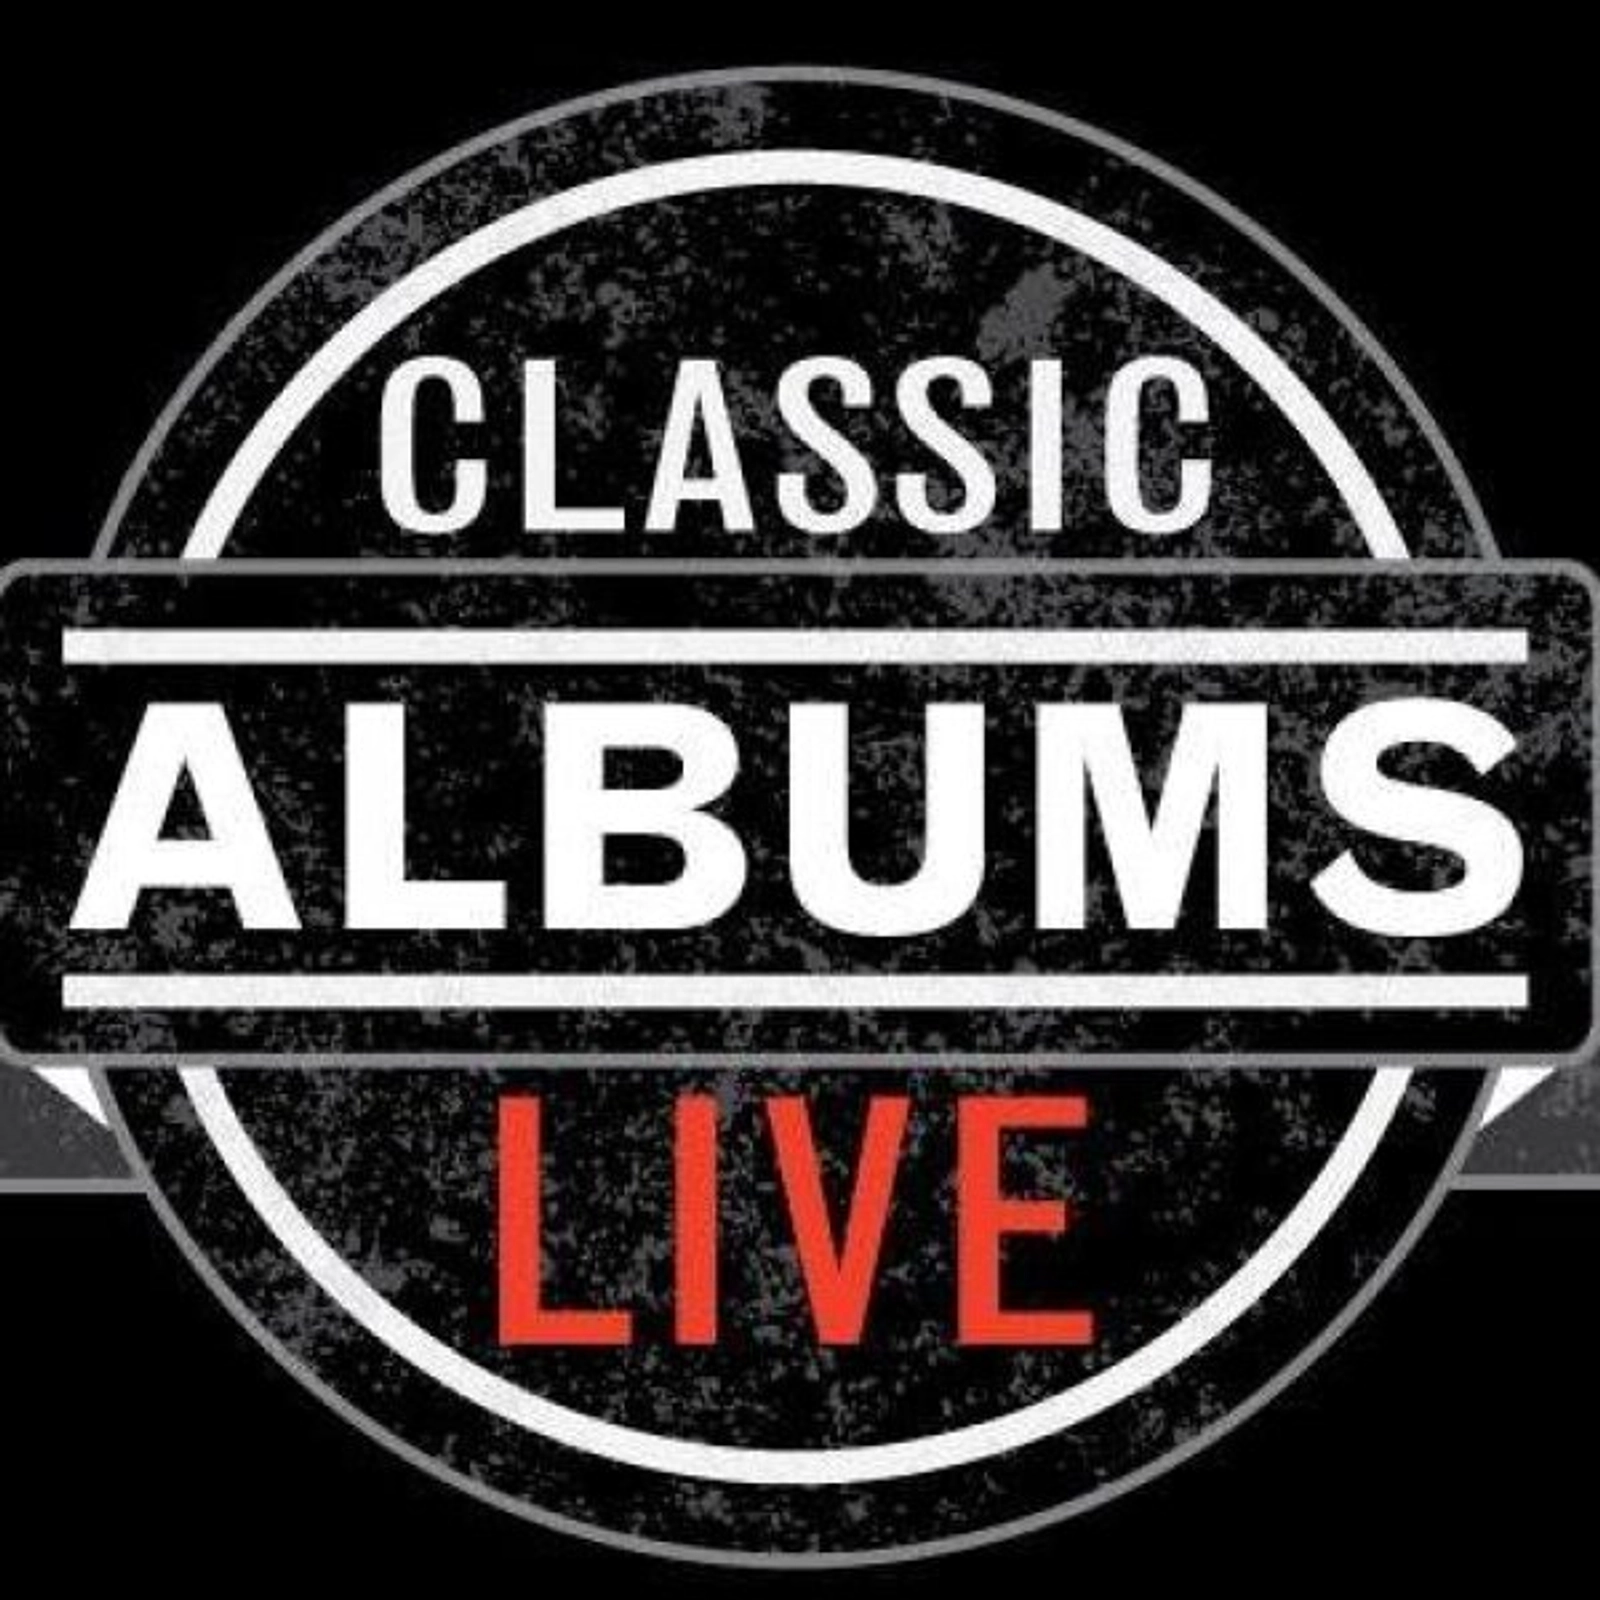   Tickets to Classic Albums Live: The Rolling Stones "Let It Bleed" at Hard Rock Live on 7/27!   - Thumbnail Image